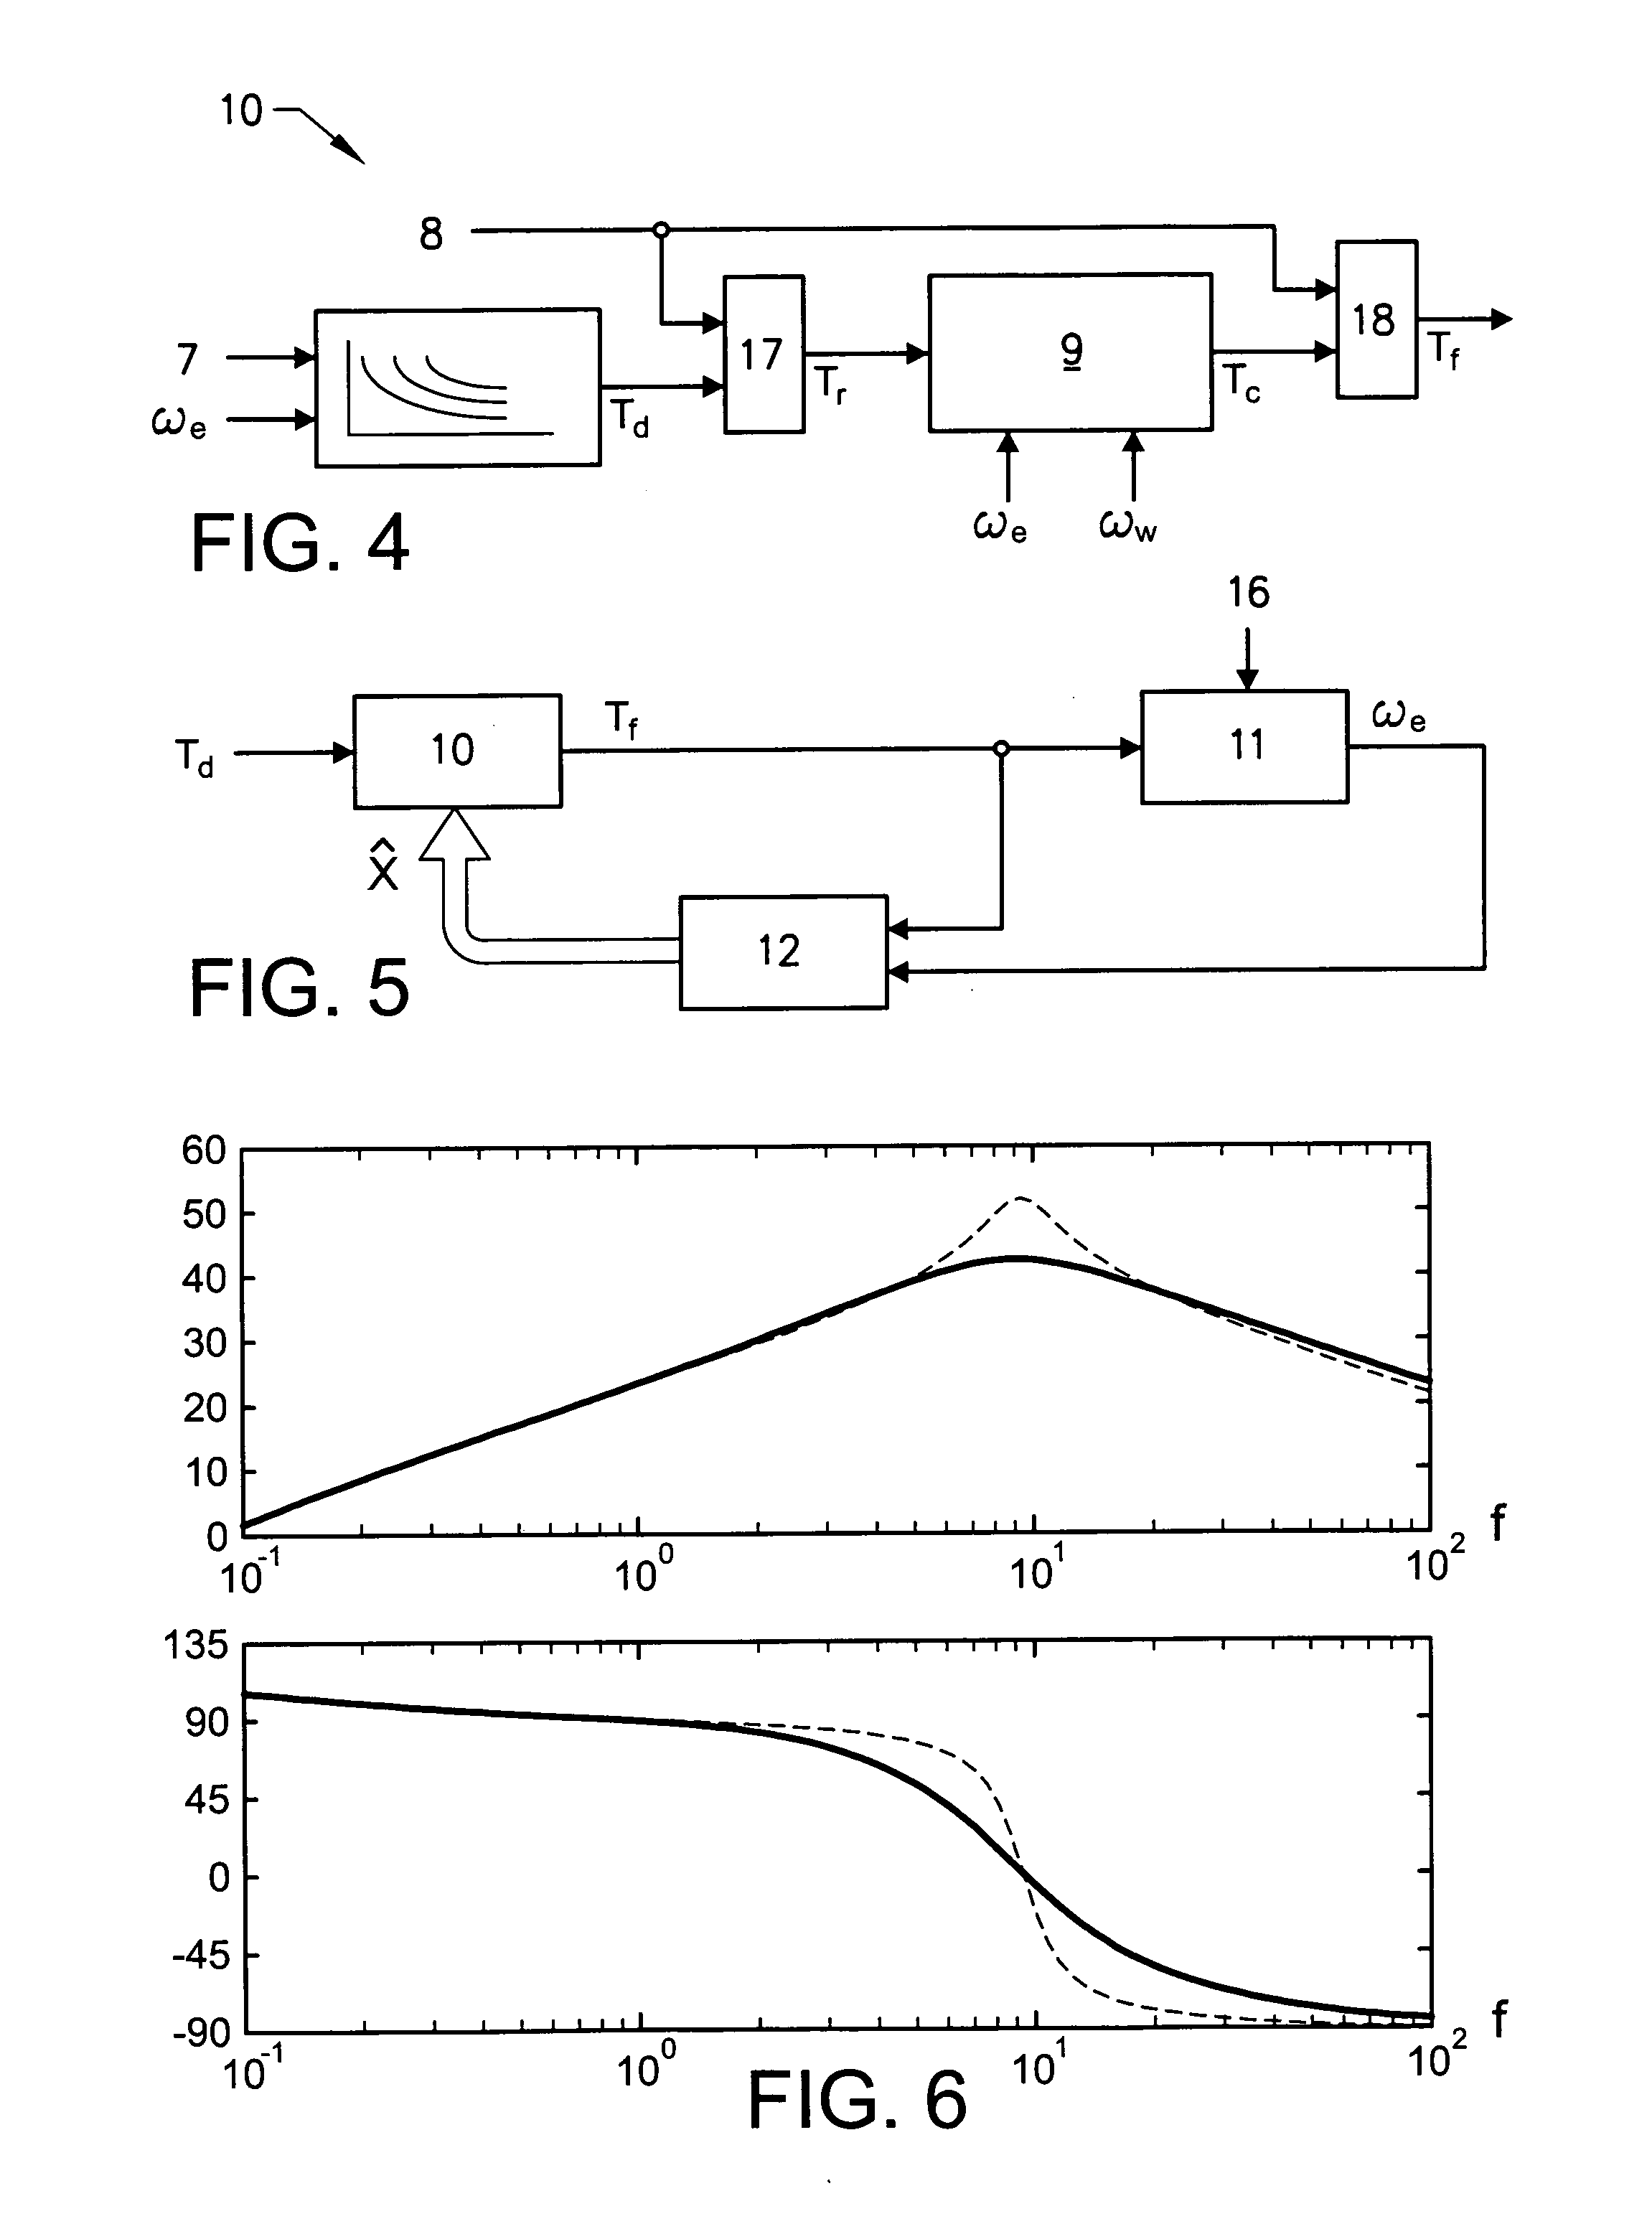 Method and controller for controlling output torque of a propulsion unit